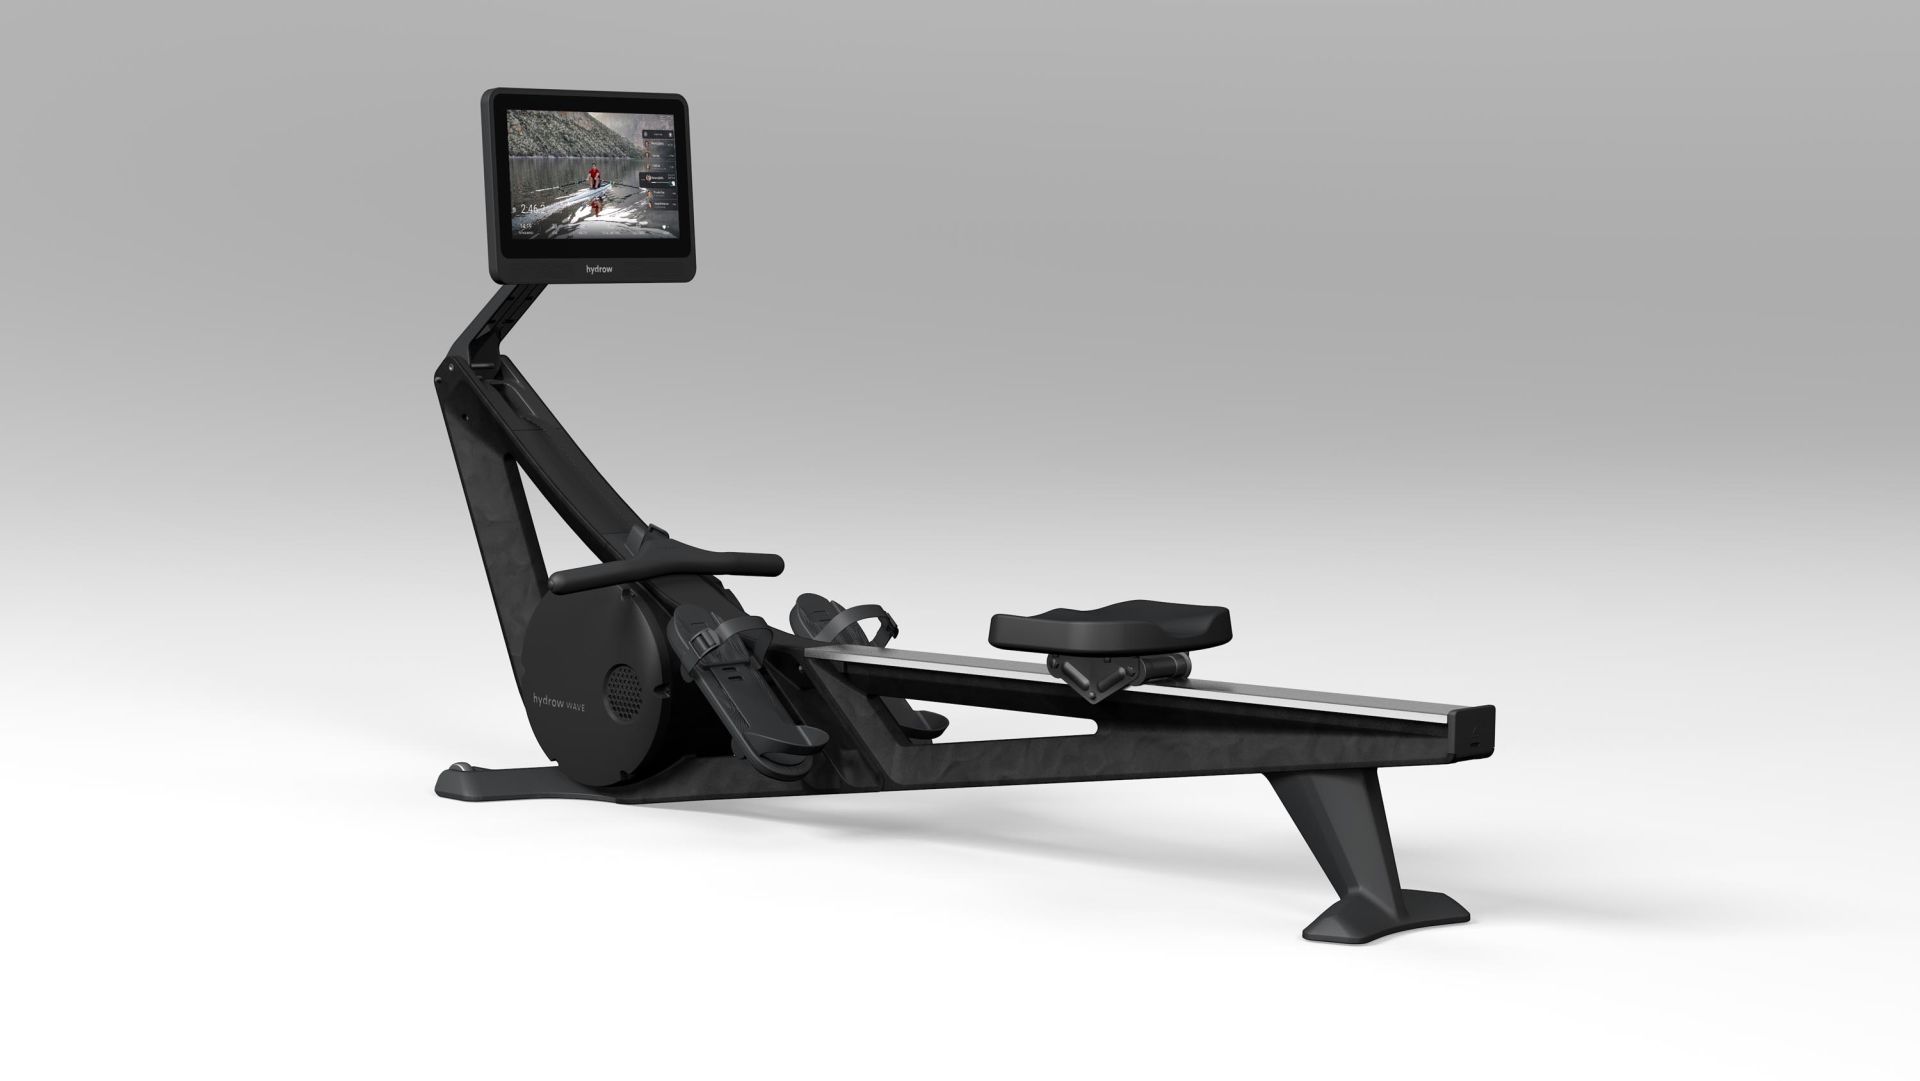 Hydrow Rowing Machines + Machine Mat, On The Mat Kit & Foam Roller: Wave Rower $1420 or Pro Rower $1720 + Free Shipping